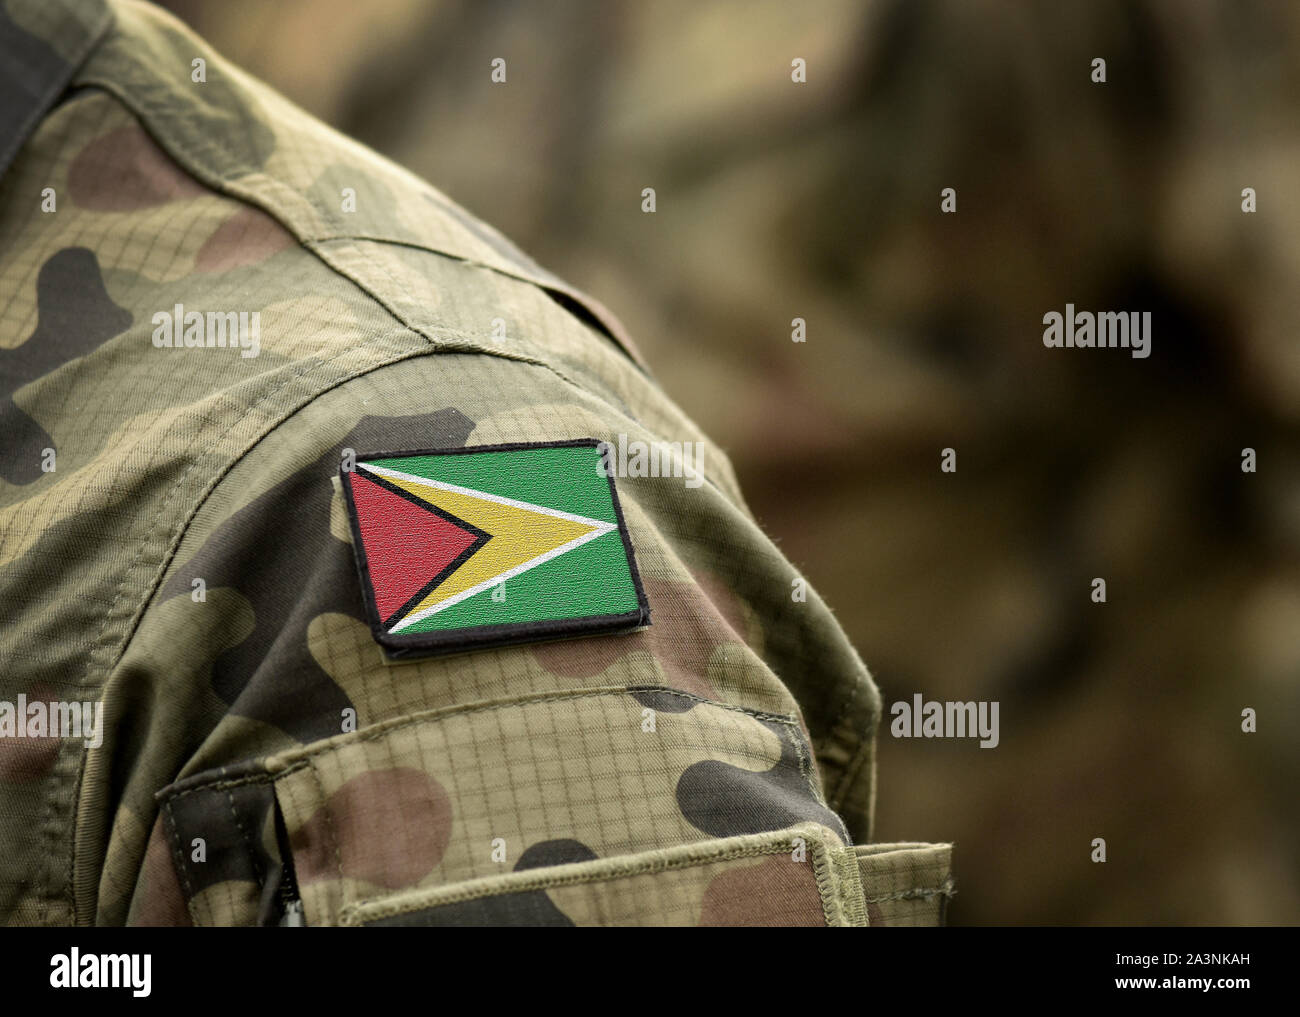 Flag of Guyana on on military uniform. Flag of Co-operative Republic of Guyana on military uniforms. Army, troops, soldier (collage). Stock Photo